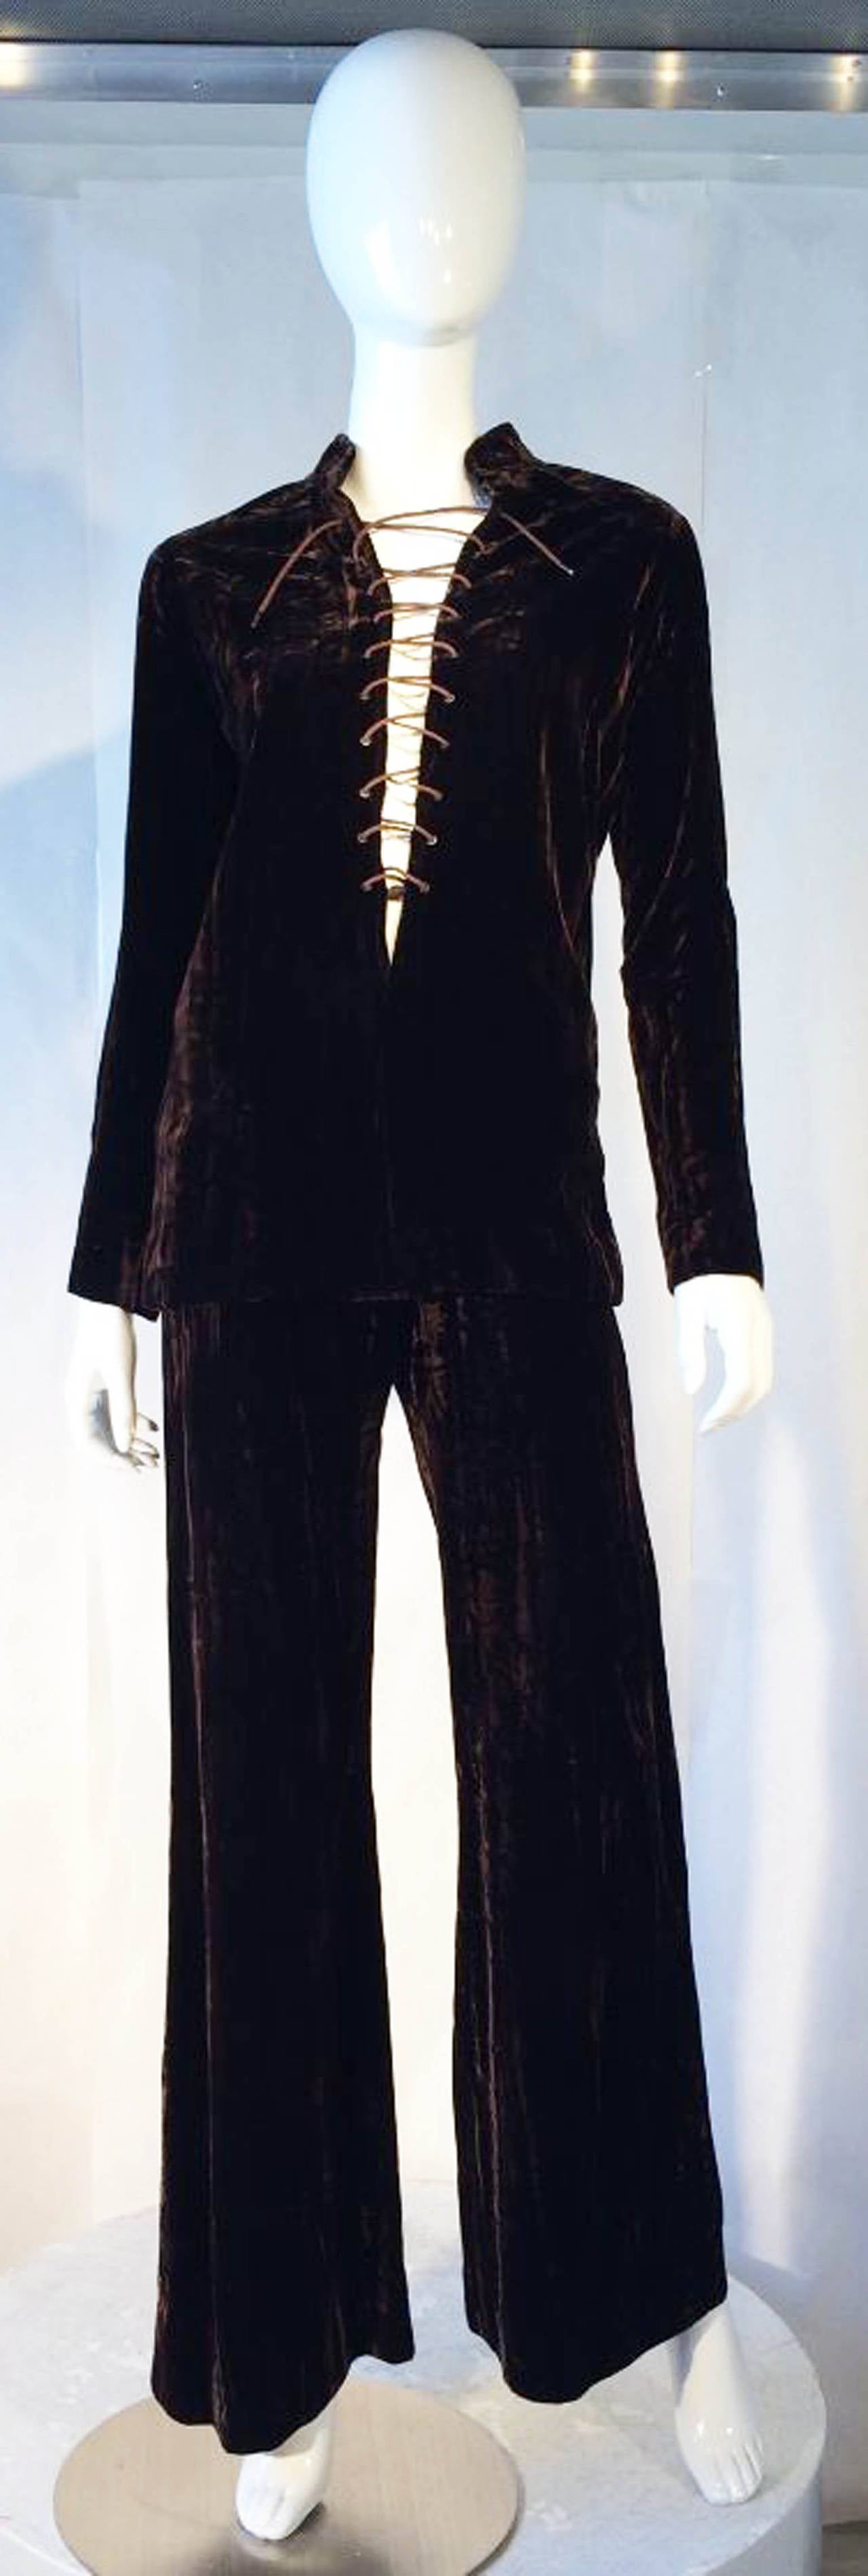 A fine and rare vintage Yves Saint Laurent trouser suit previously owned and worn by Astrid Wyman. Rich brown crushed velvet fabric item features a deeply cut 